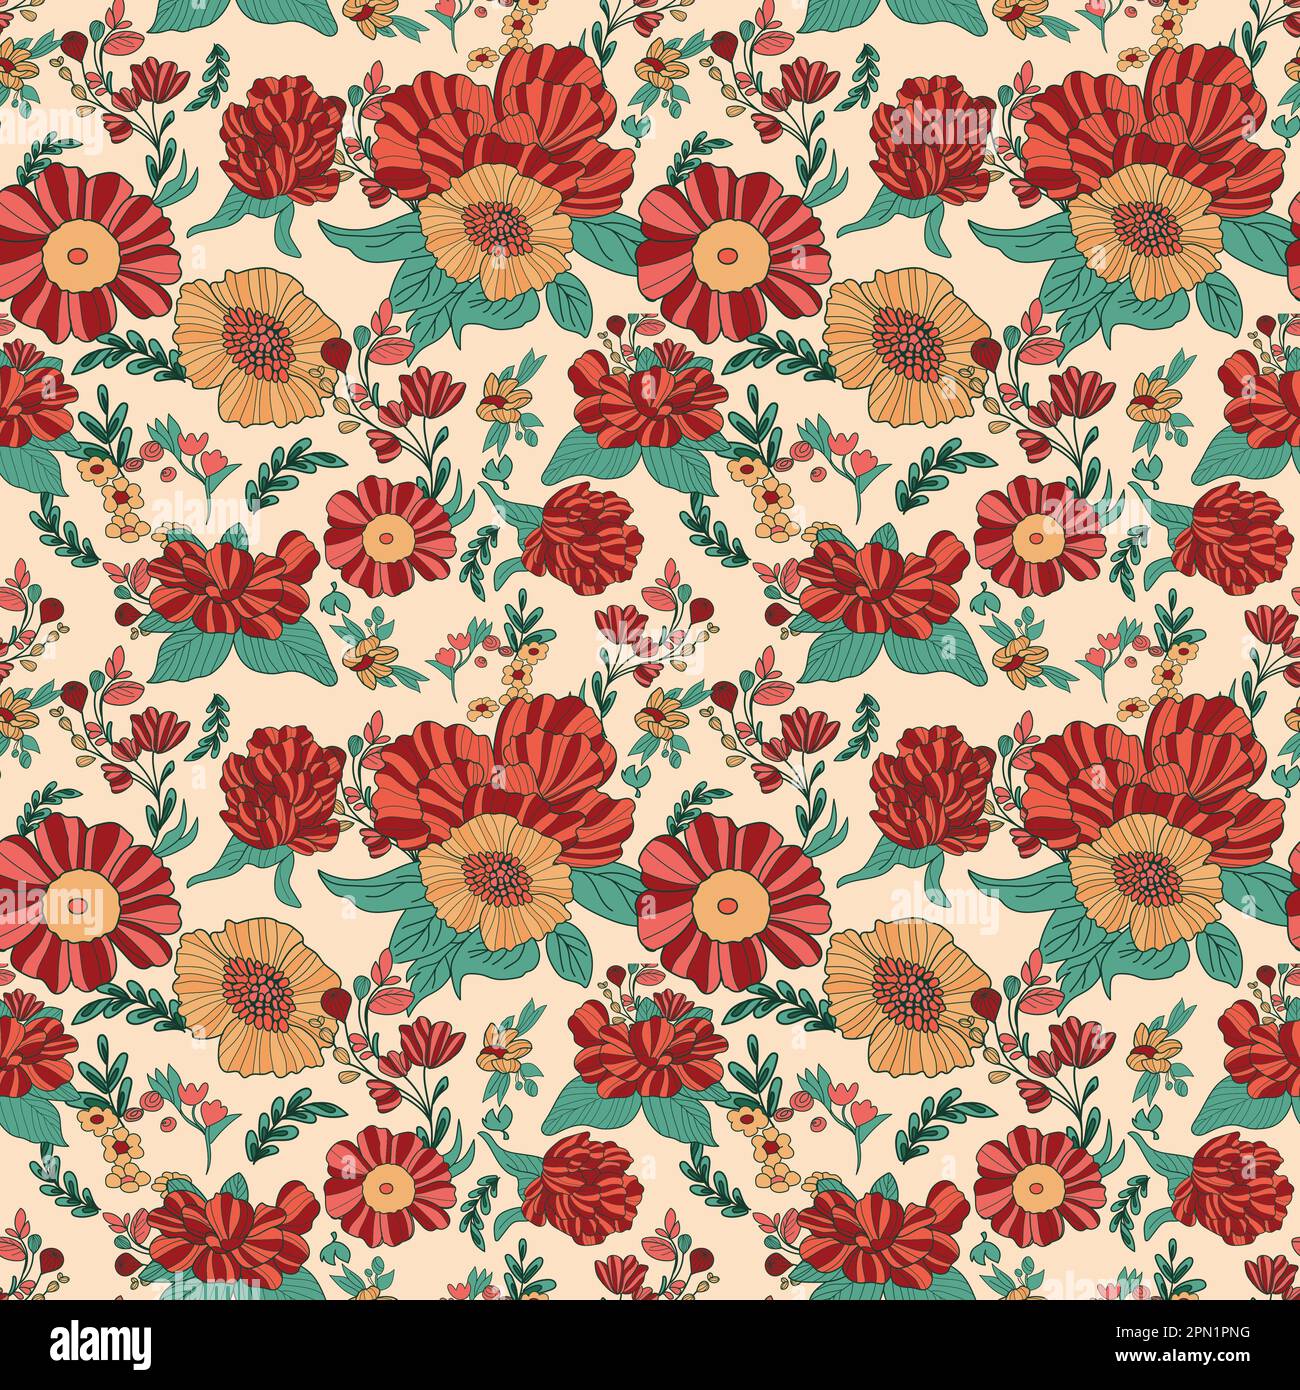 Summer Red and Yellow Floral Seamless Pattern Stock Vector